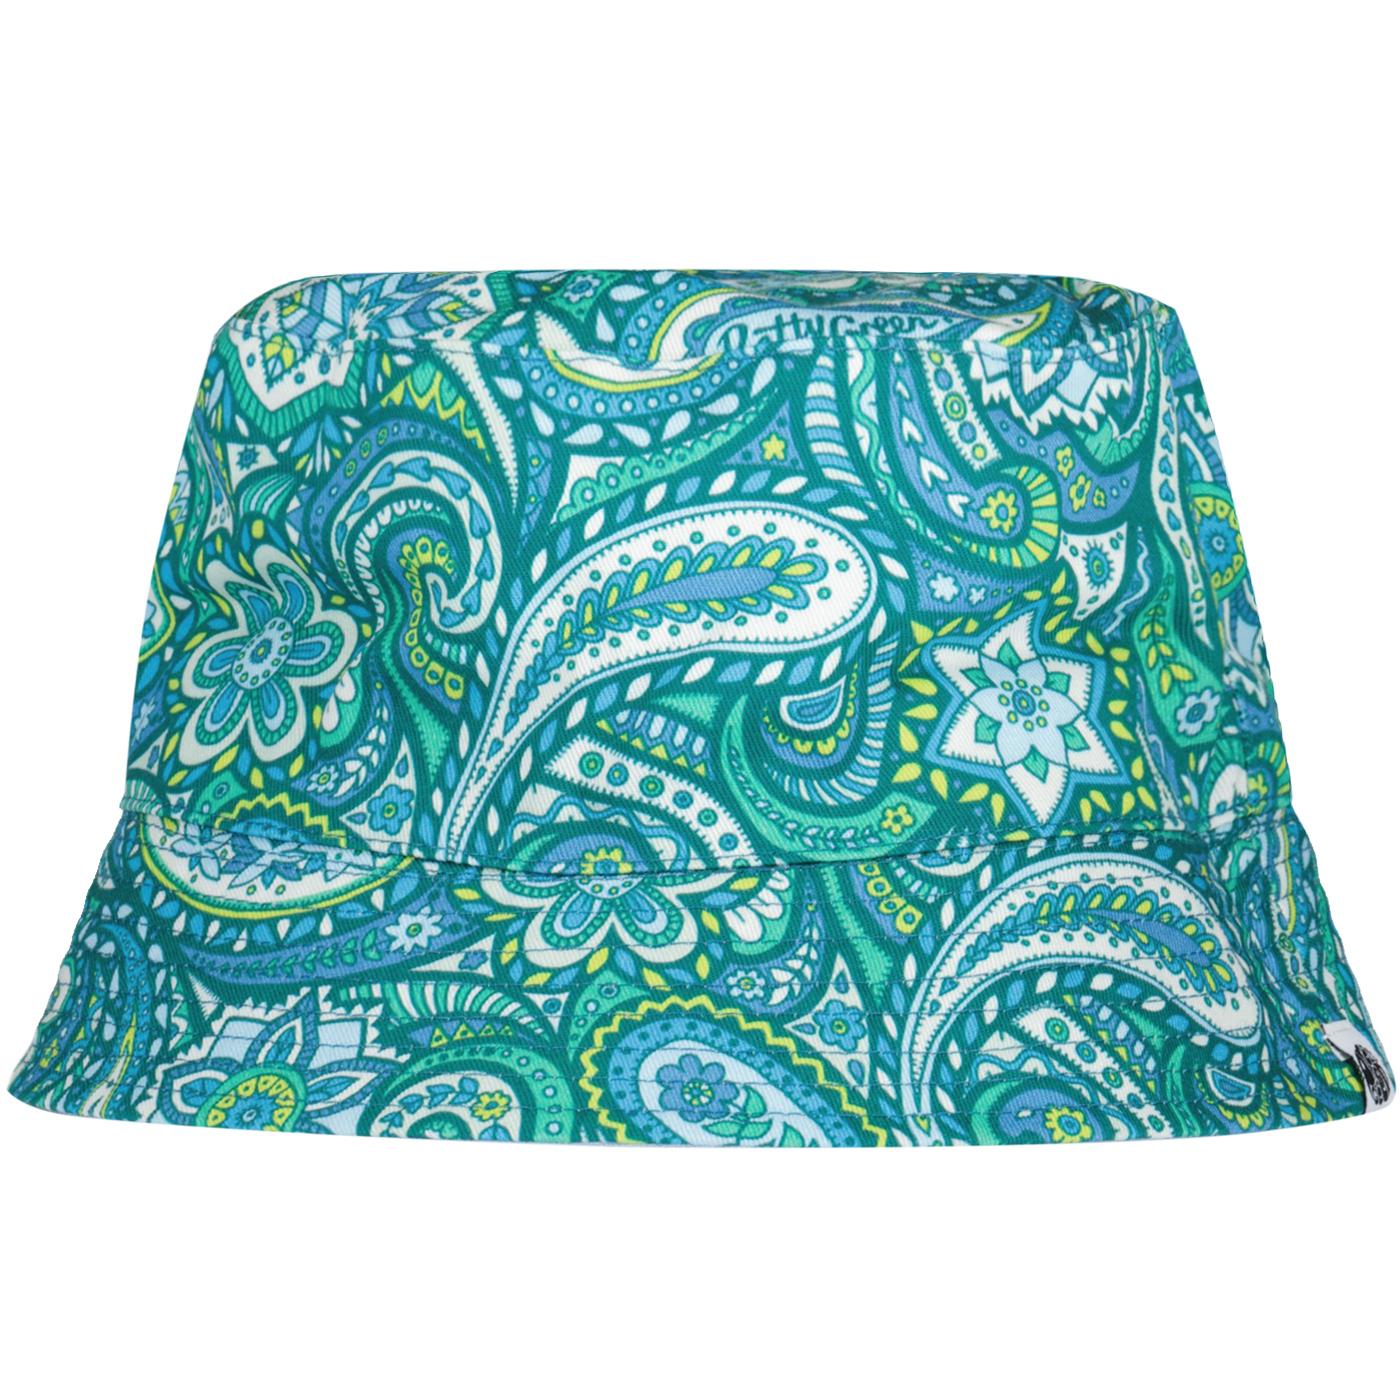 Itchycoo Pretty Green Retro Reversible Bucket Hat